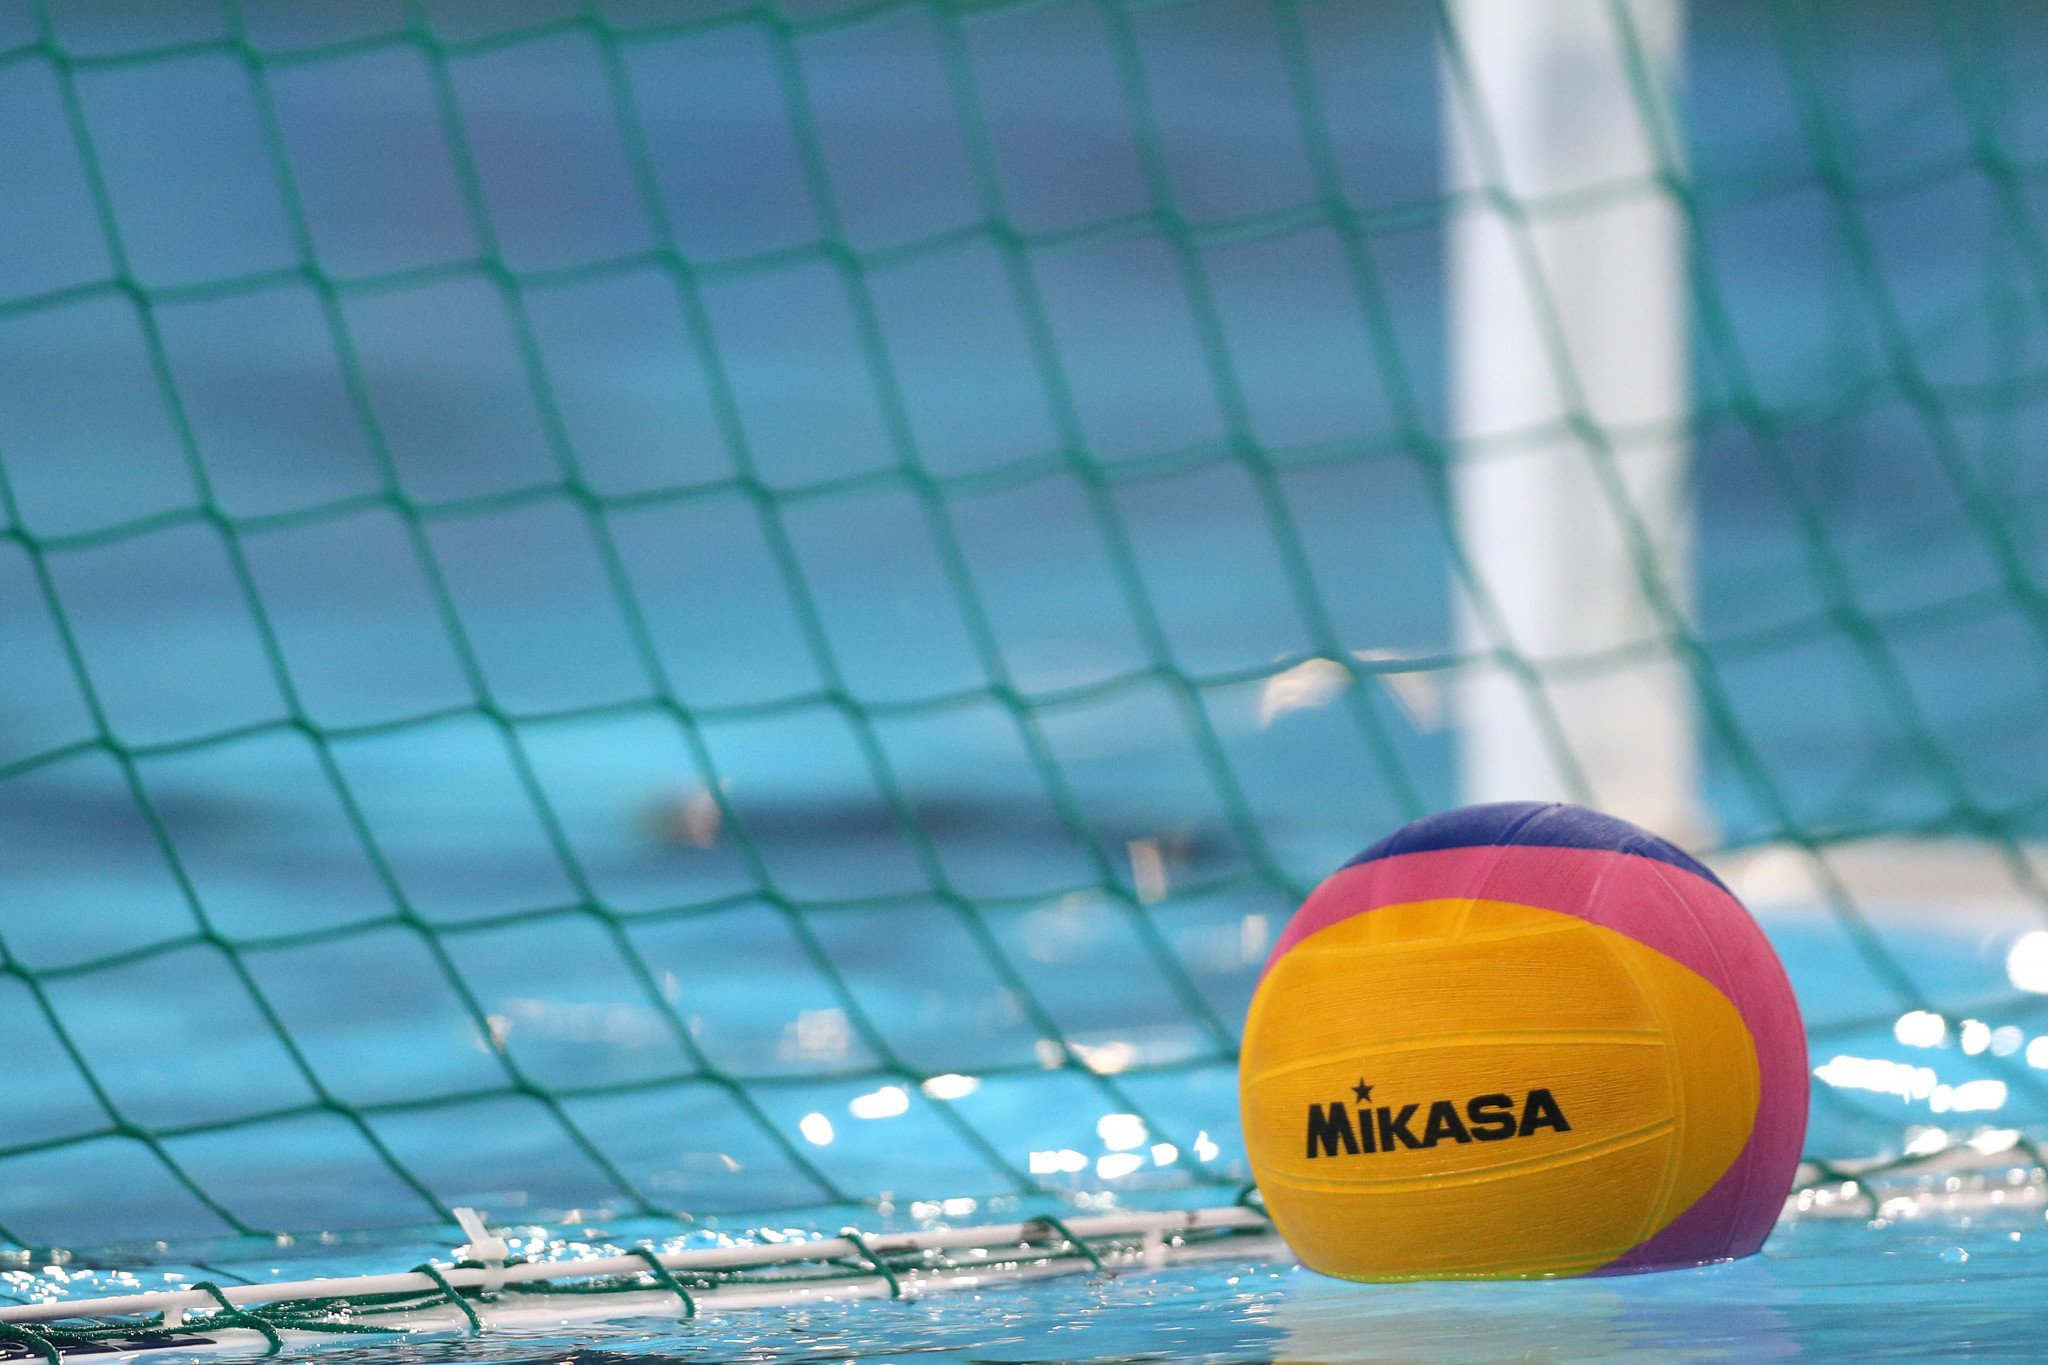 Petition calls for resignation of USA Water Polo chief executive and chairman for failing to report sexual abuse allegations